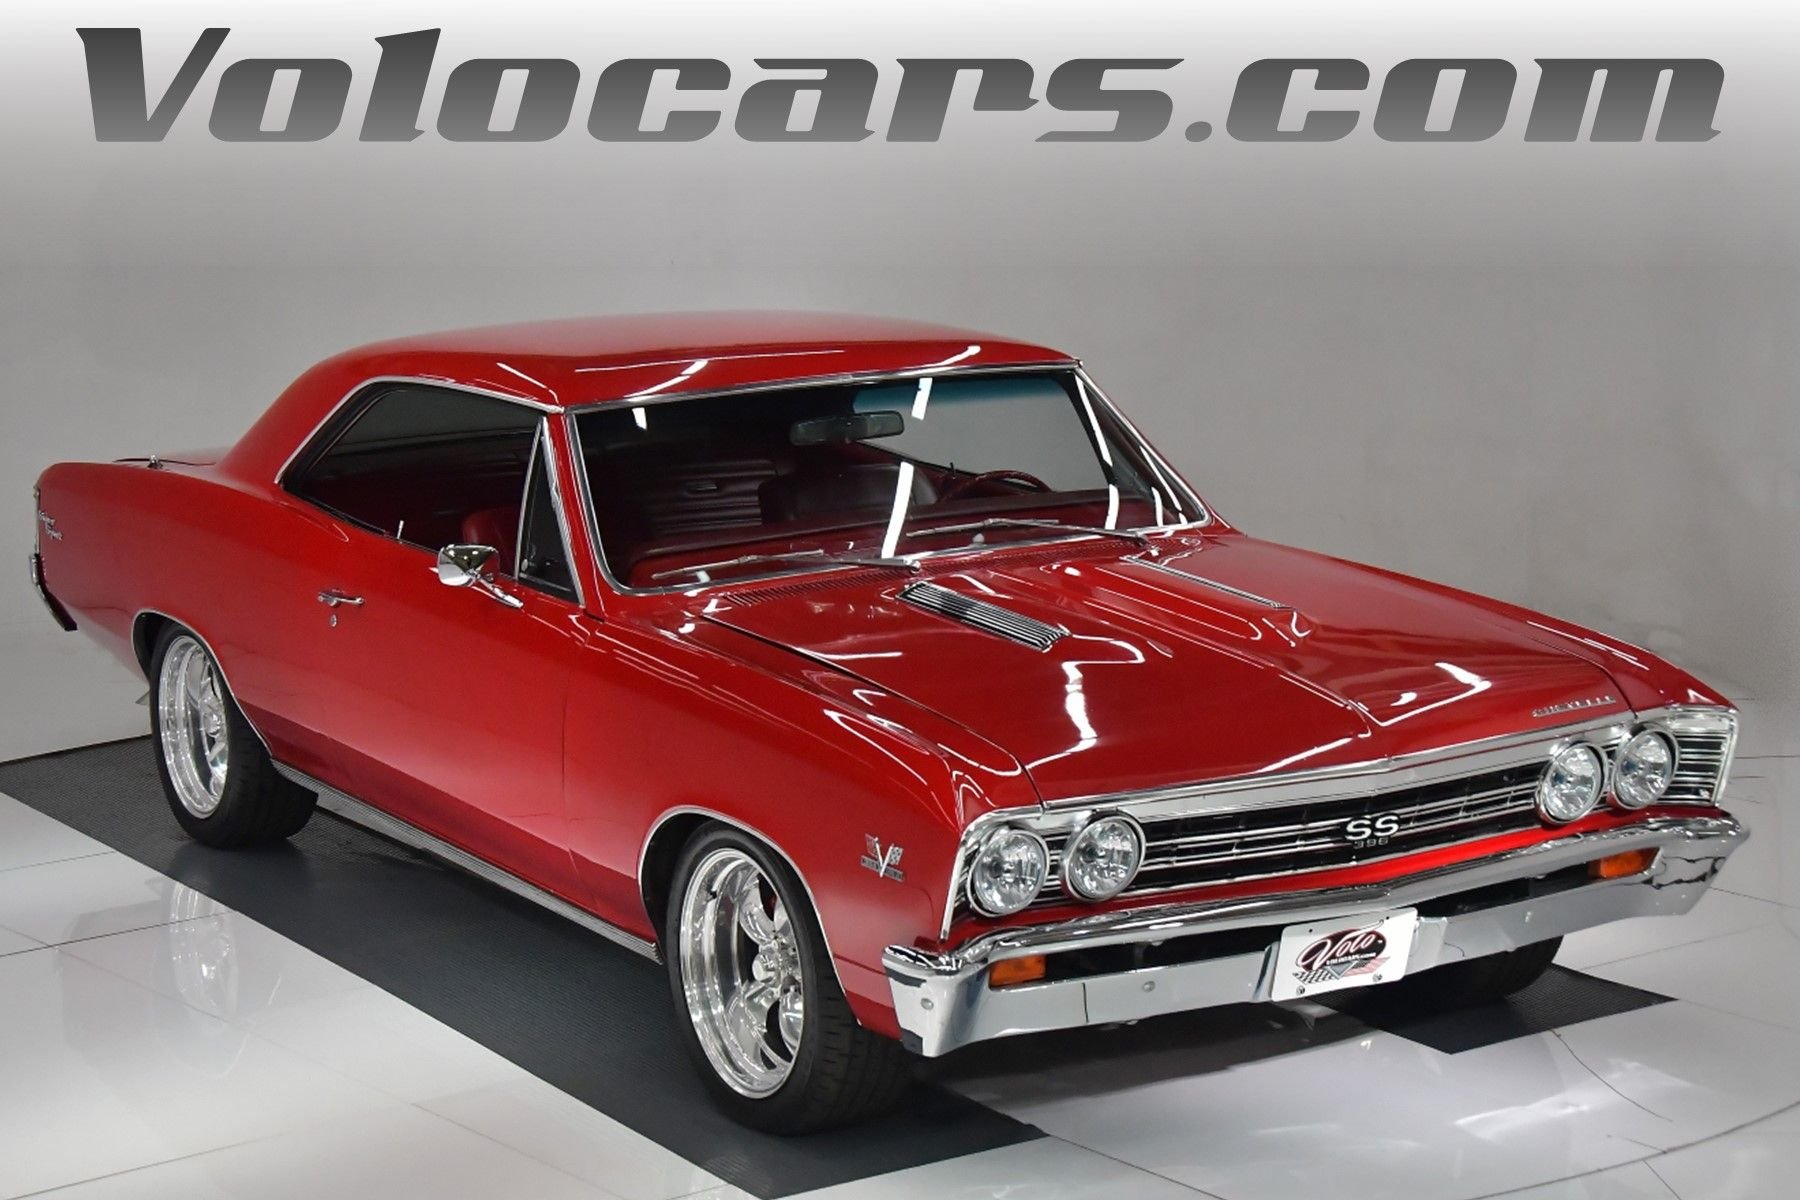 Sold | Classic Cars For Sale - Buy Collector Cars - Volo Auto Sales